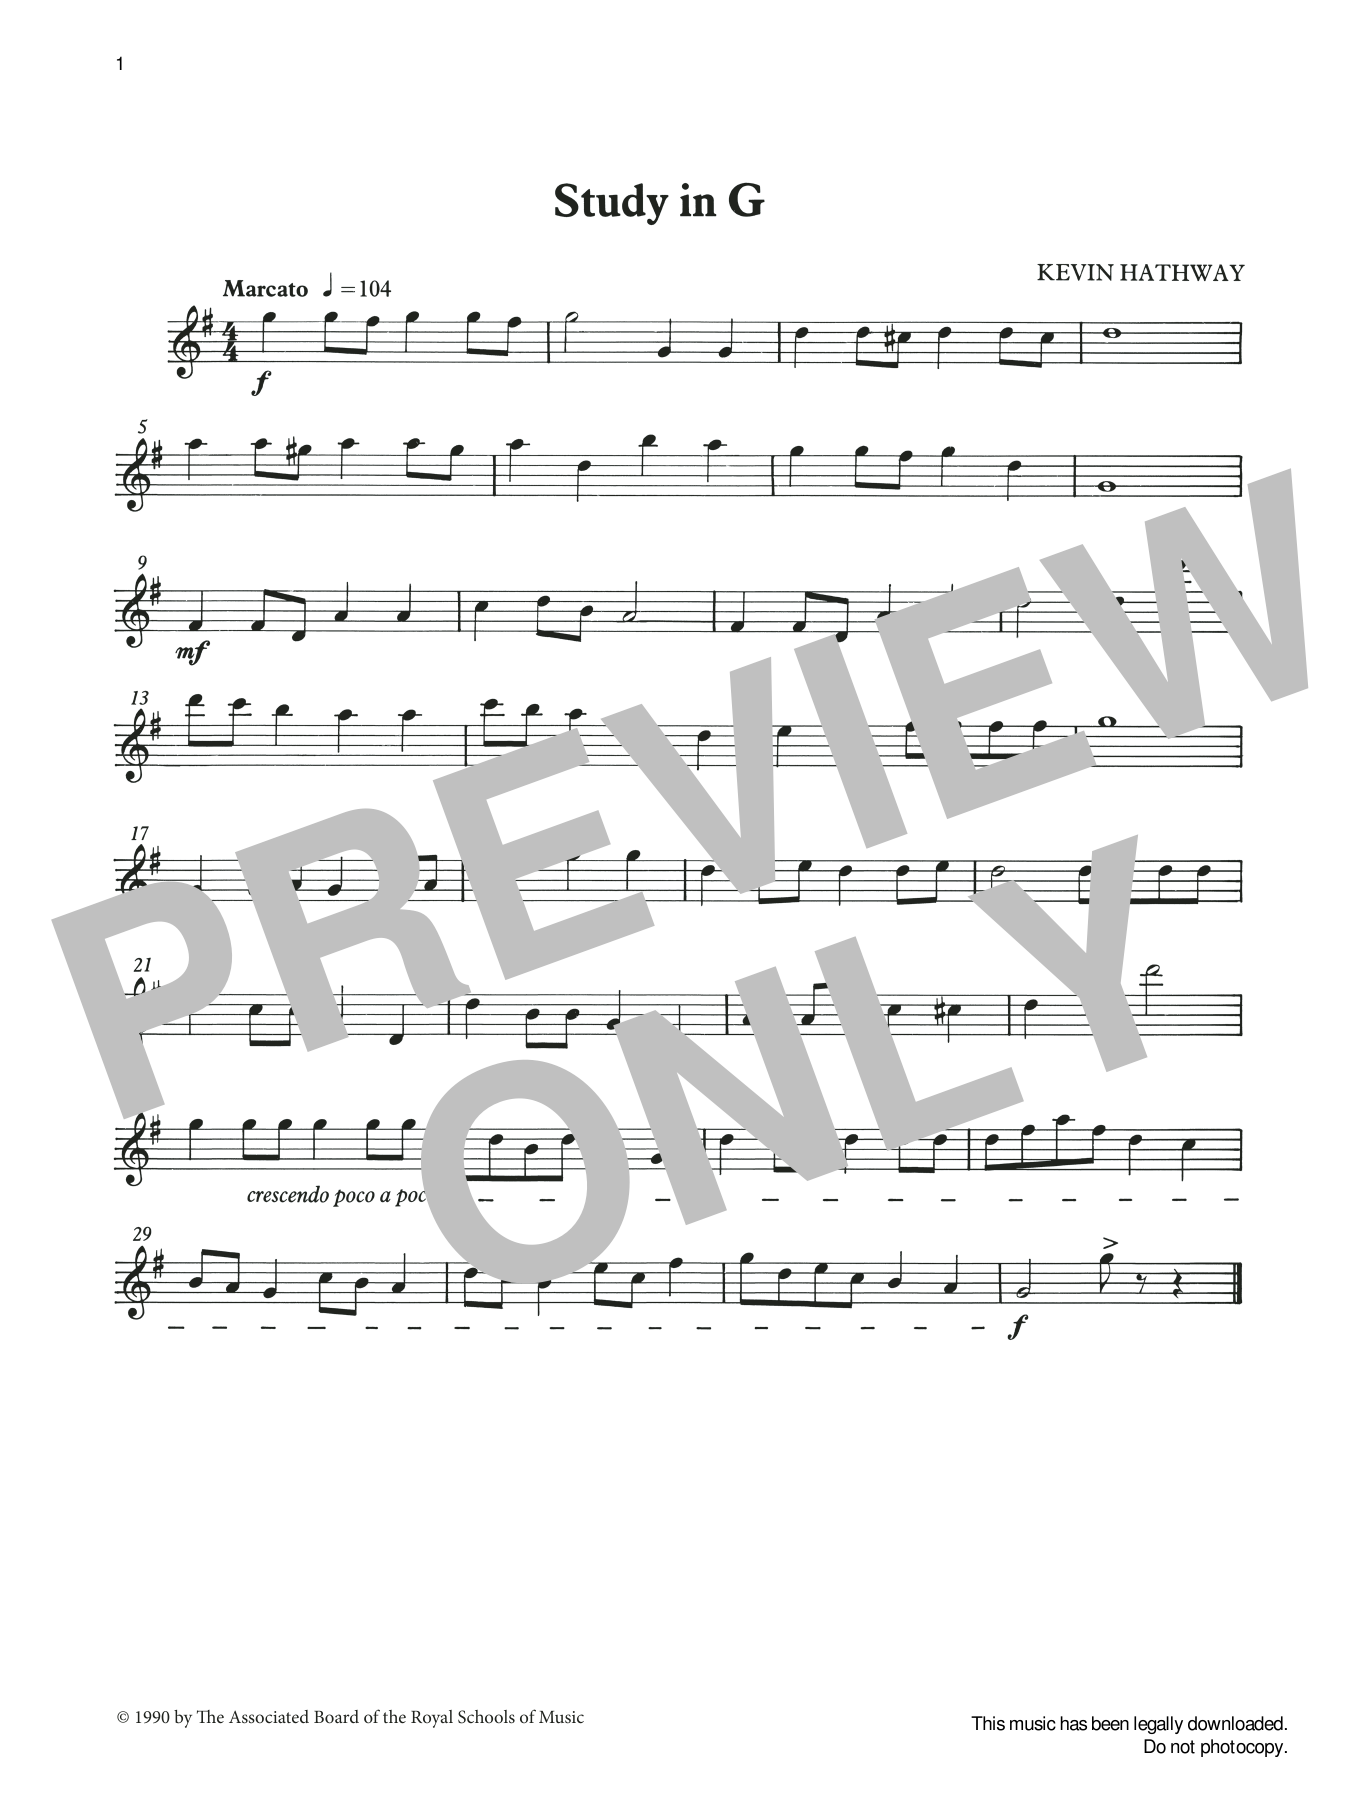 Download Ian Wright and Kevin Hathaway Study in G from Graded Music for Tuned Sheet Music